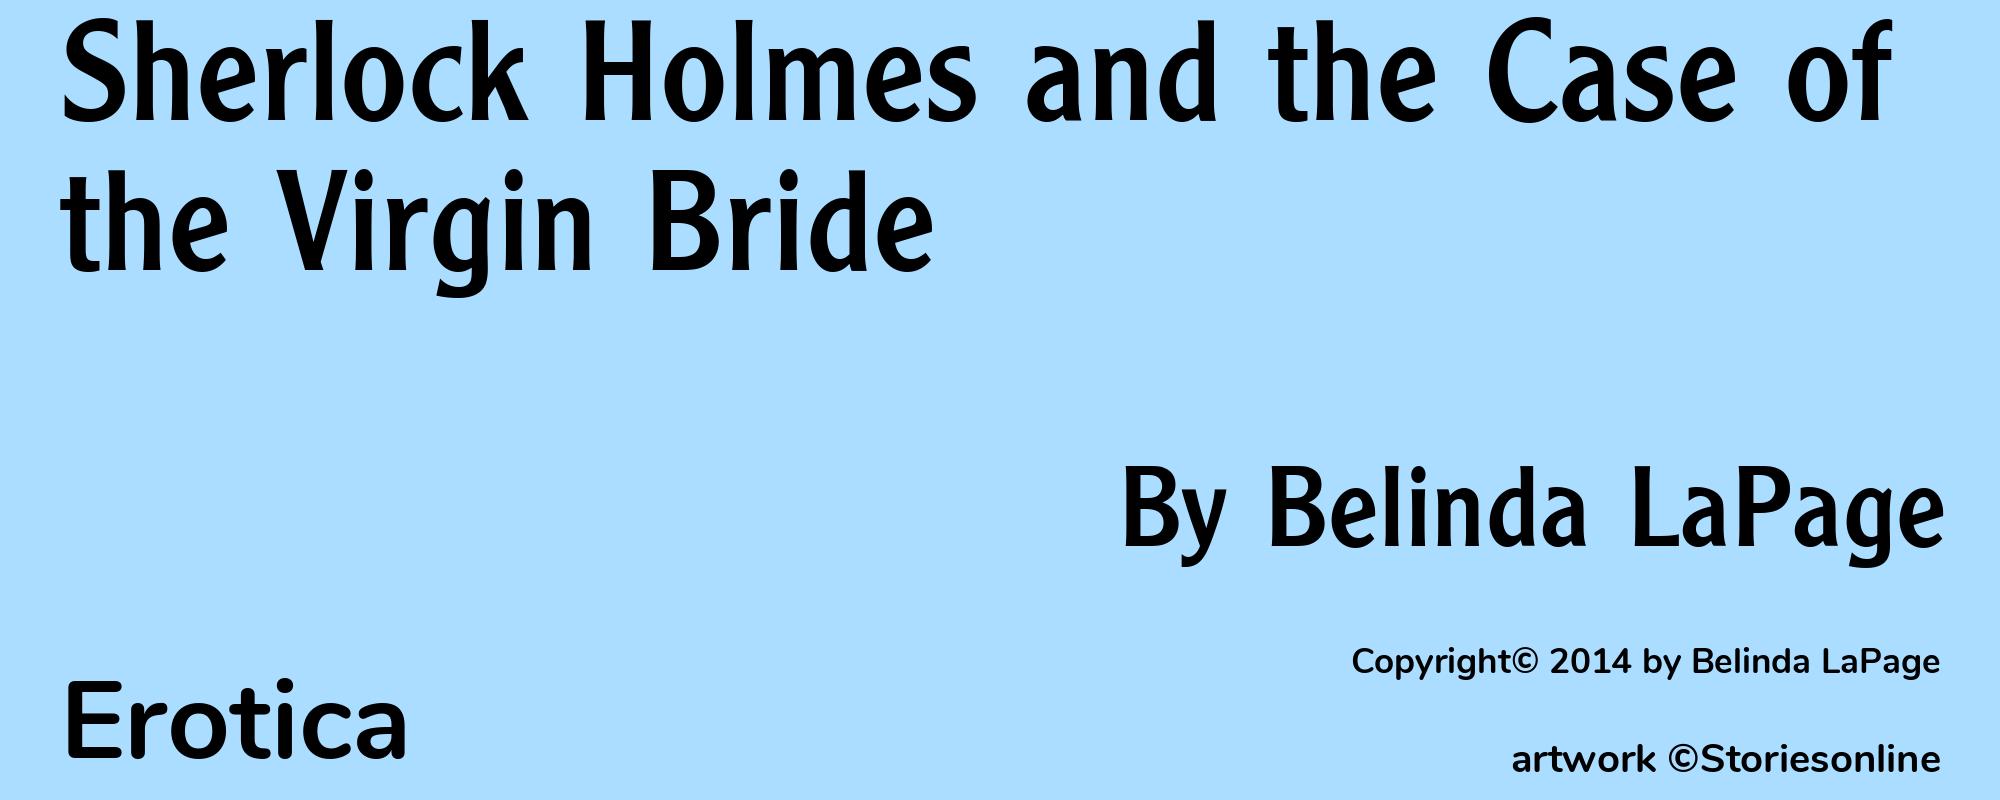 Sherlock Holmes and the Case of the Virgin Bride - Cover